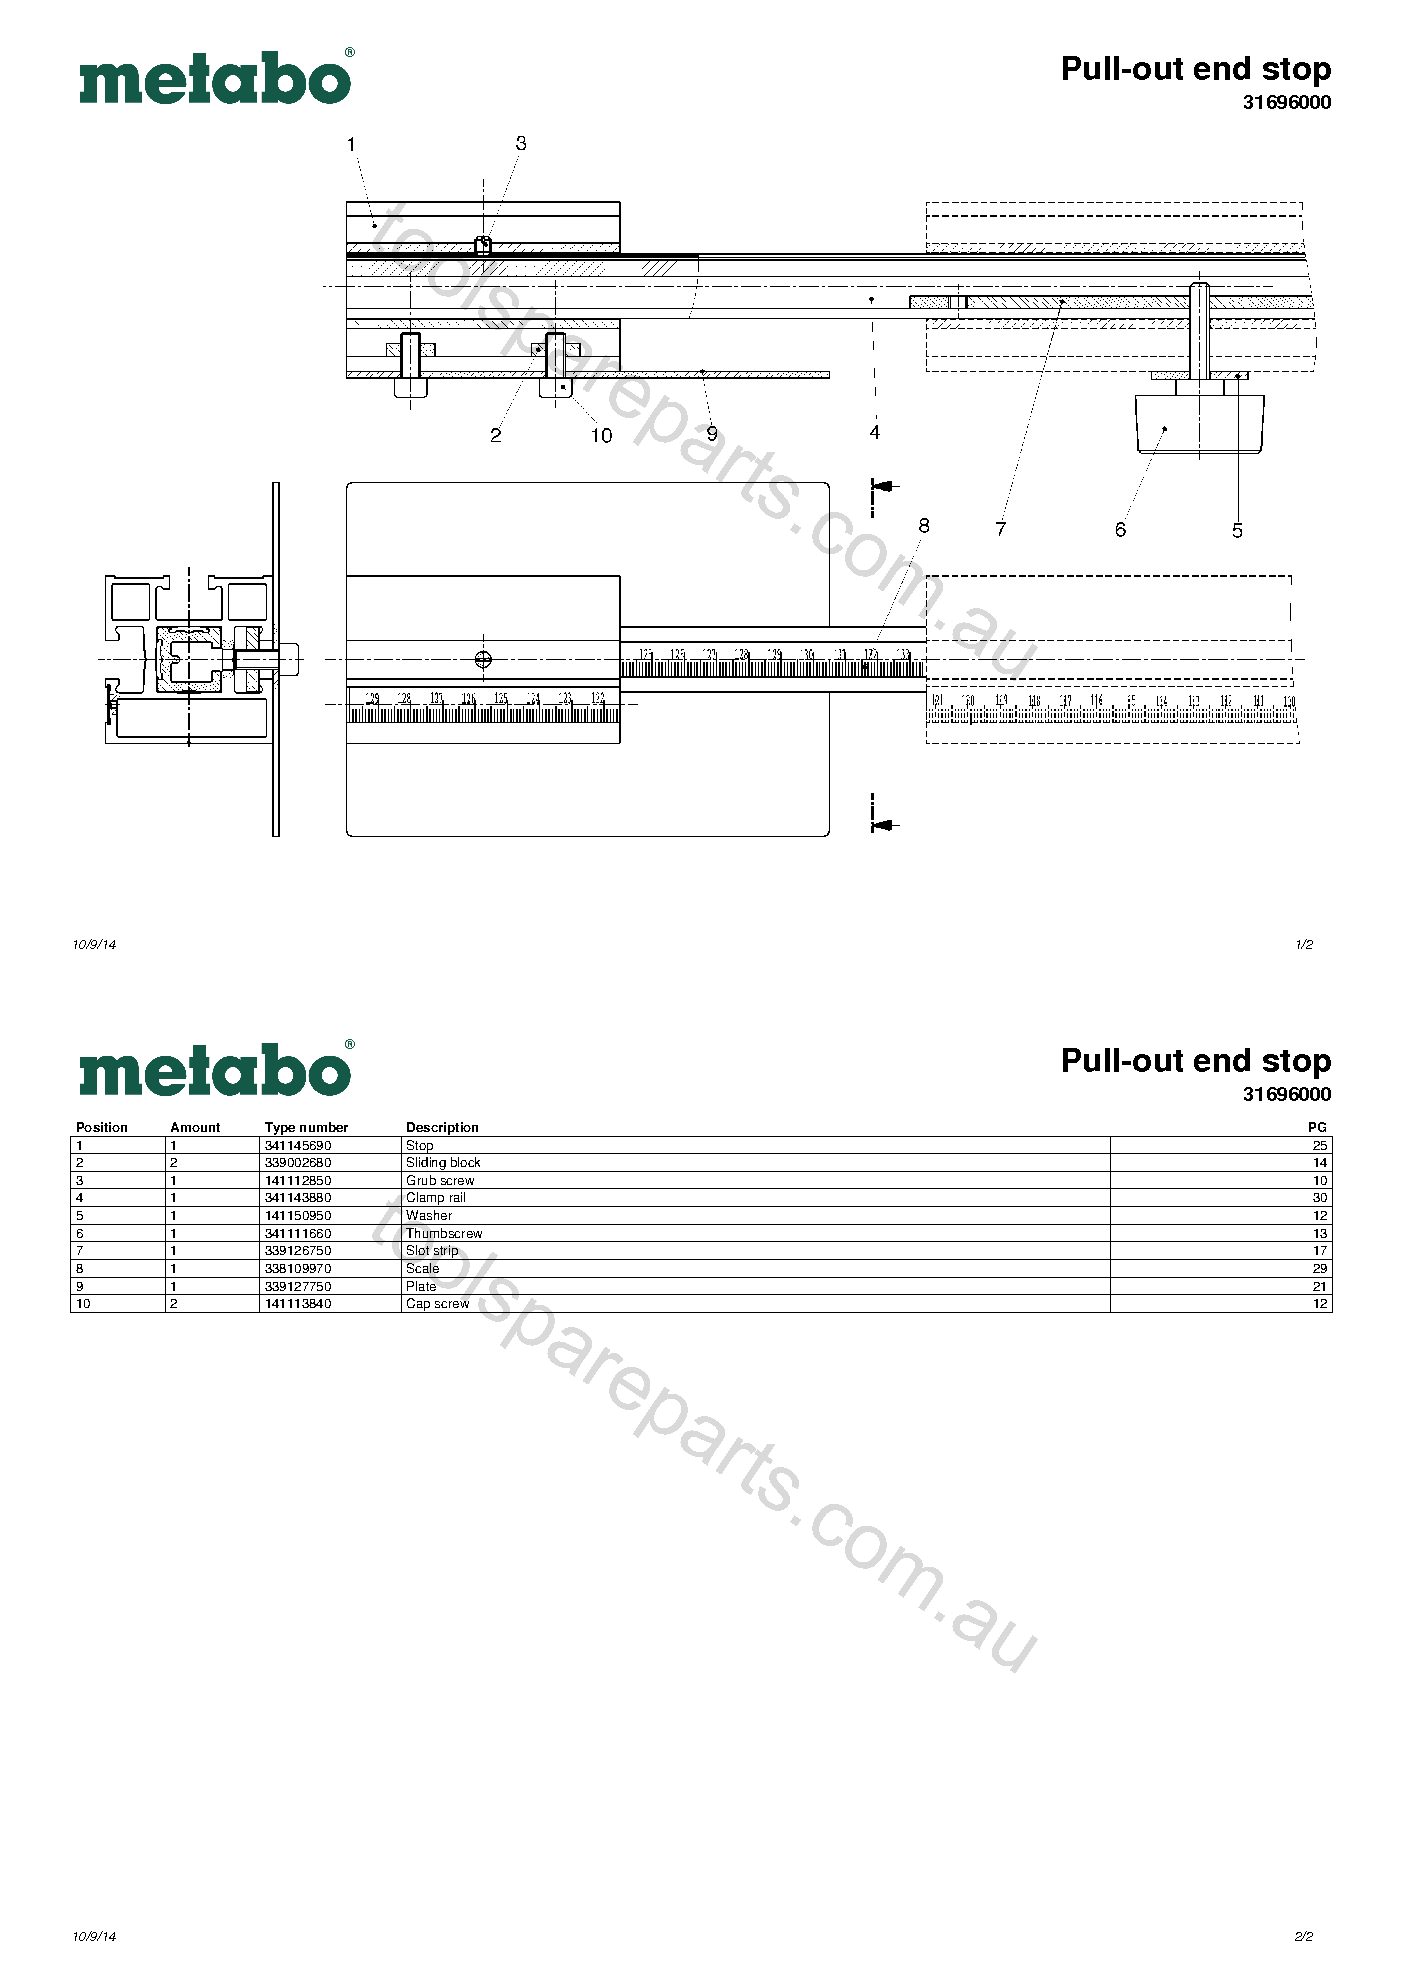 Metabo Pull-out end stop 31696000  Diagram 1